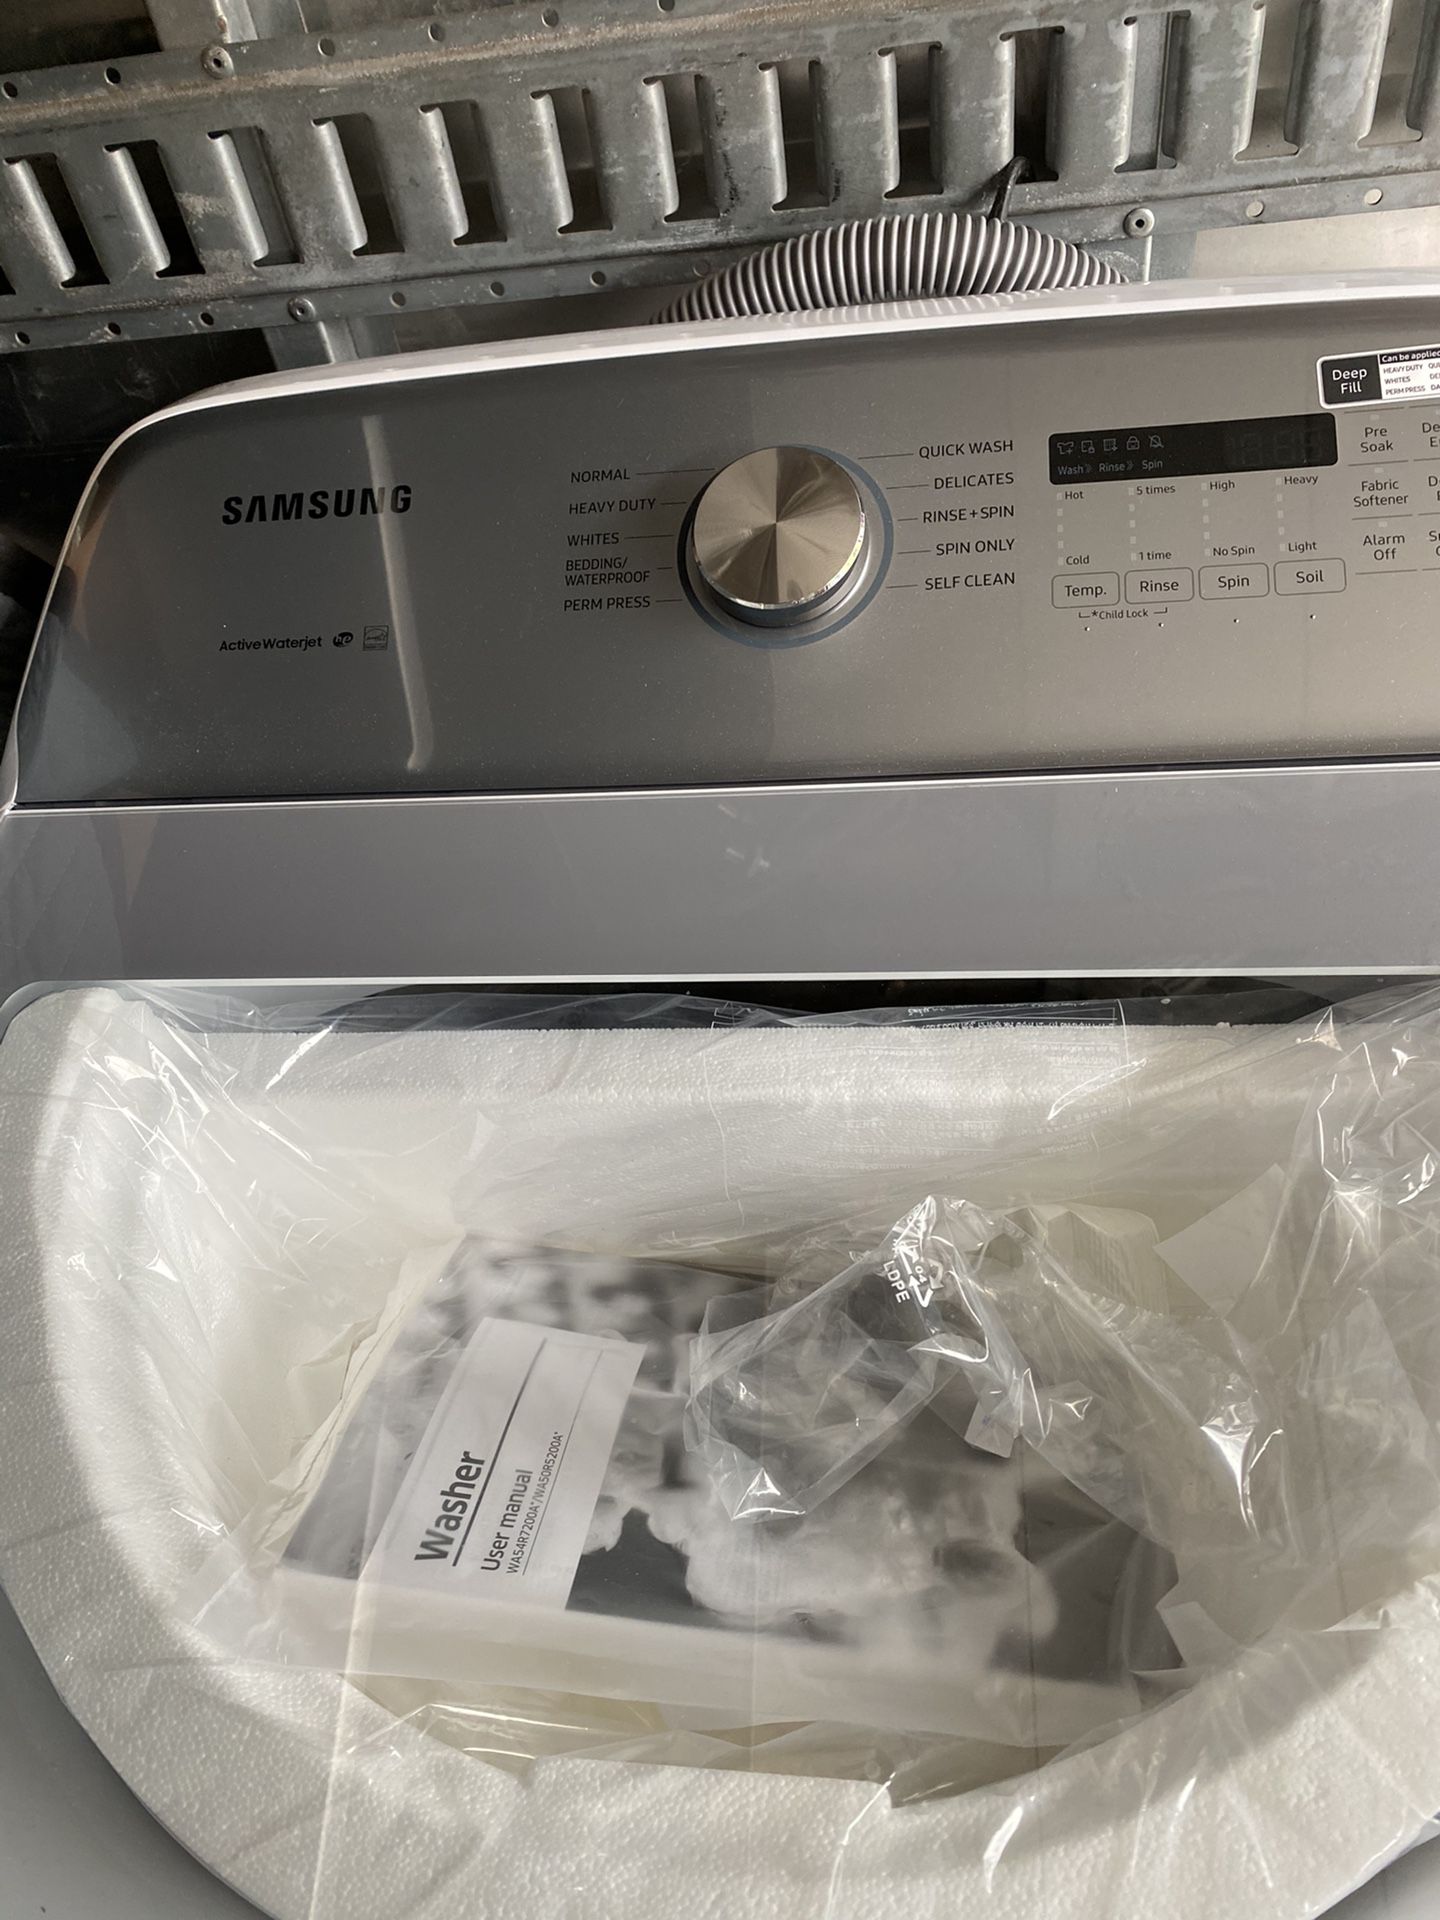 Samsung washer new directly out of plastic used as display as well as tested 350$ lowest offer I will take washer retail 695$ and up.